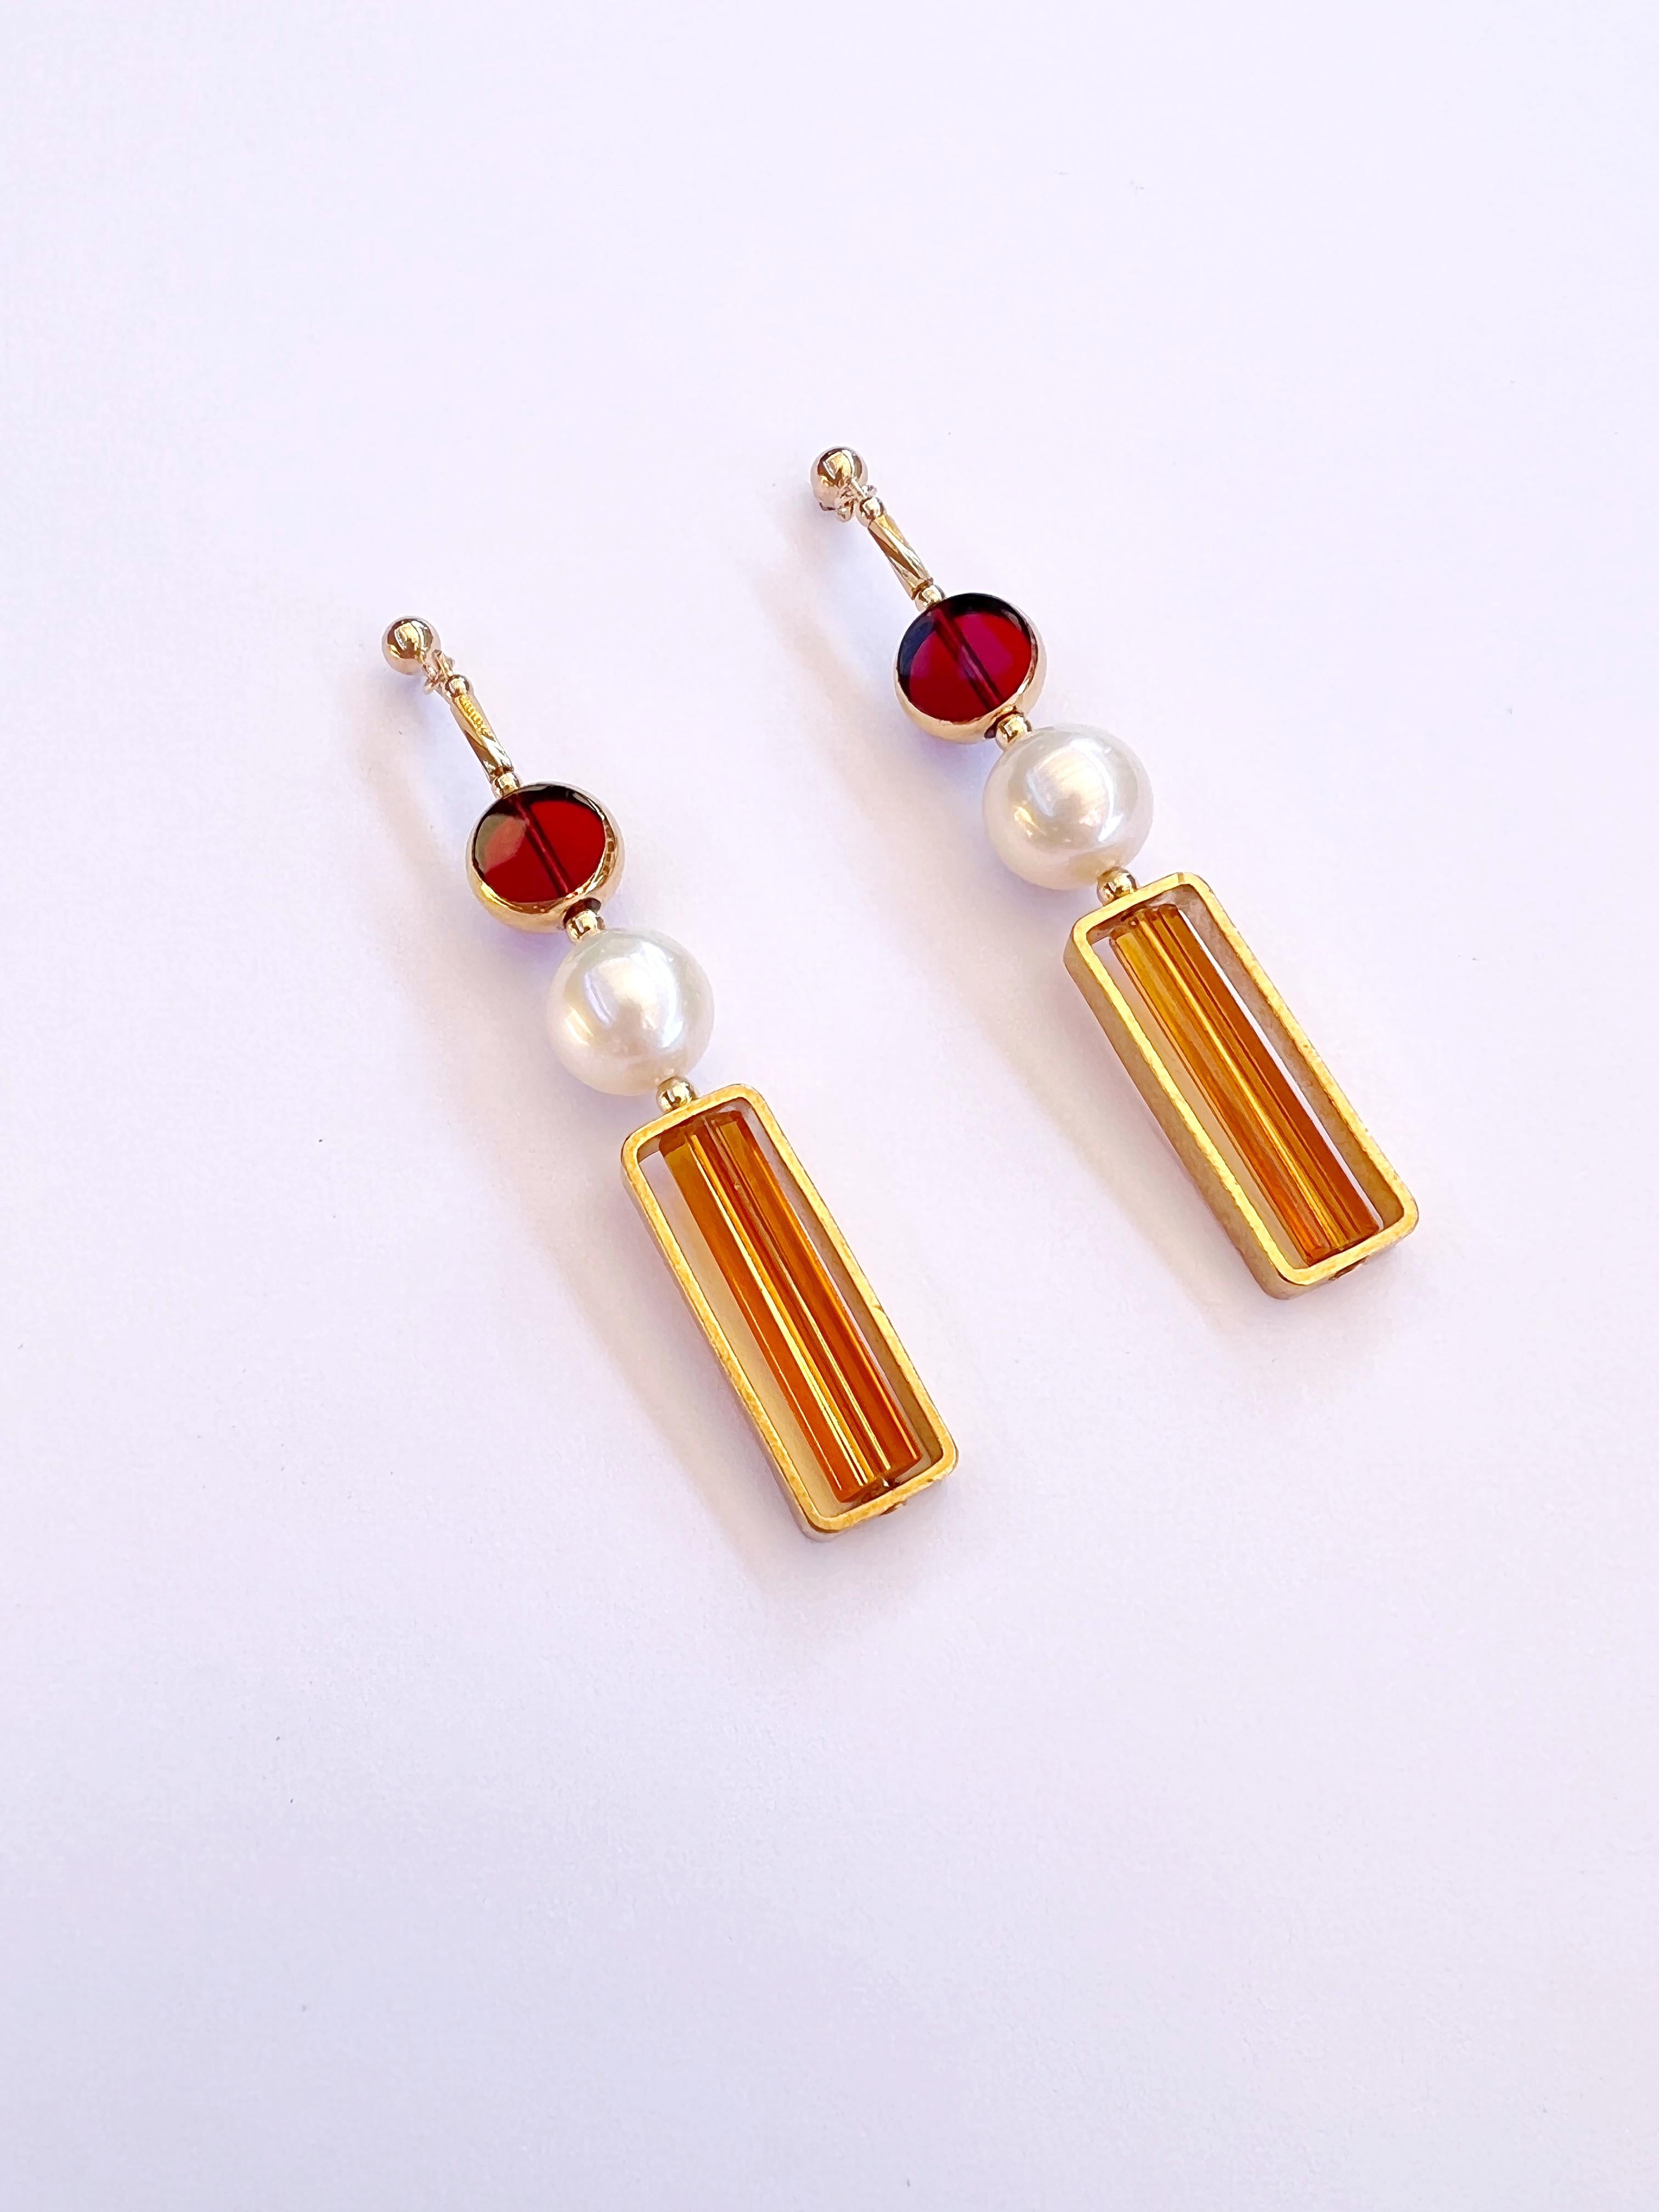 Red transparent vintage German glass beads edged with 24K gold are complimented with freshwater pearls with caramel glass bugle bead. The earrings are finished with gold filled earring post and 14K gold filled beads.

The vintage German glass beads